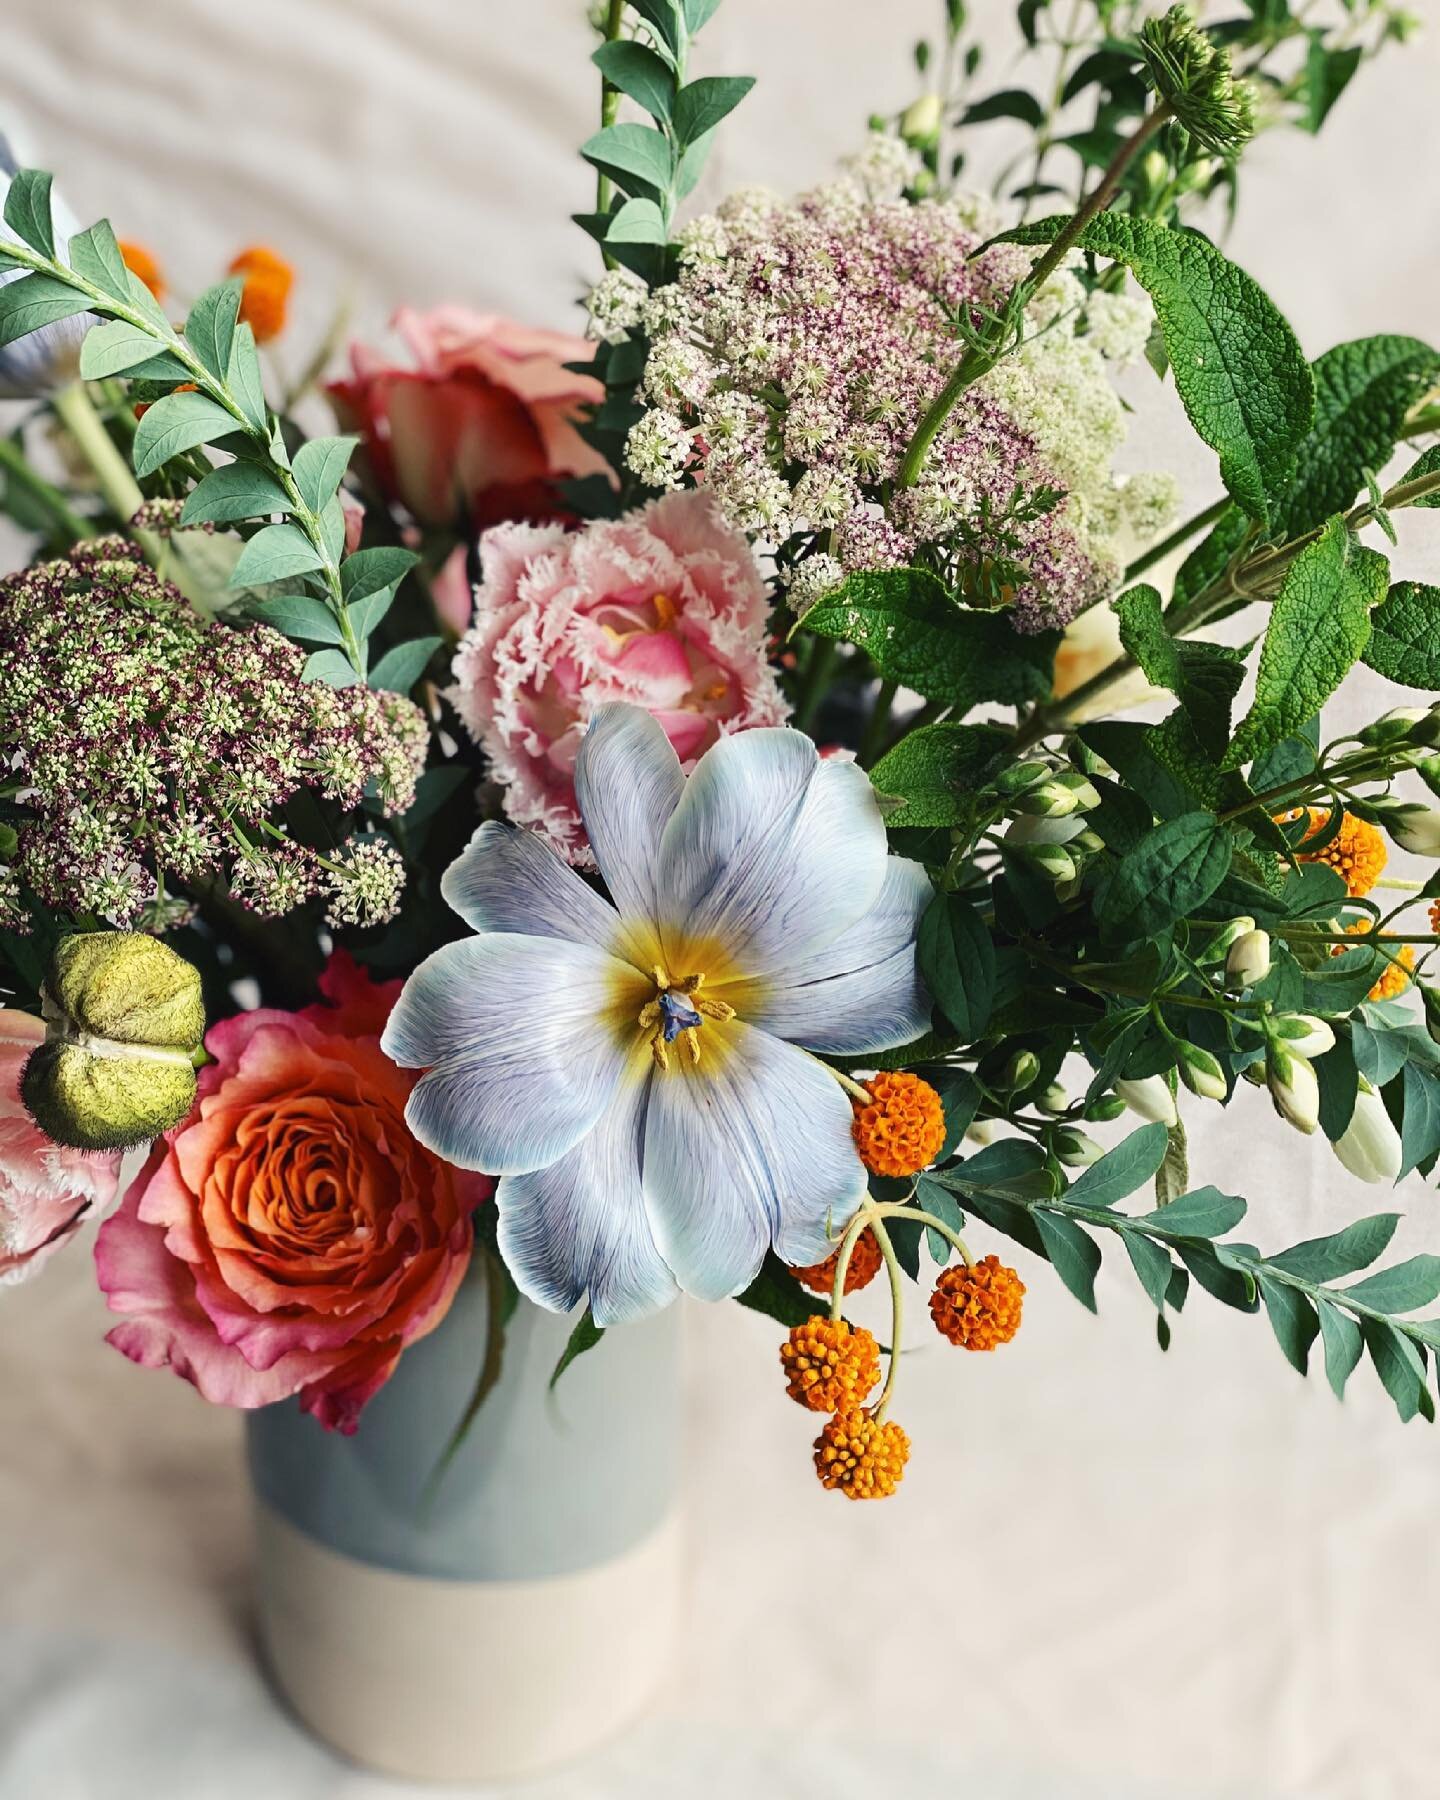 At Fleurae our approach to floral design is to keep it natural, interesting, and to let the flowers guide the design, which is one of the reasons we chose not to have a standard supply of the same flowers, or specific bouquets to chose from at all ti